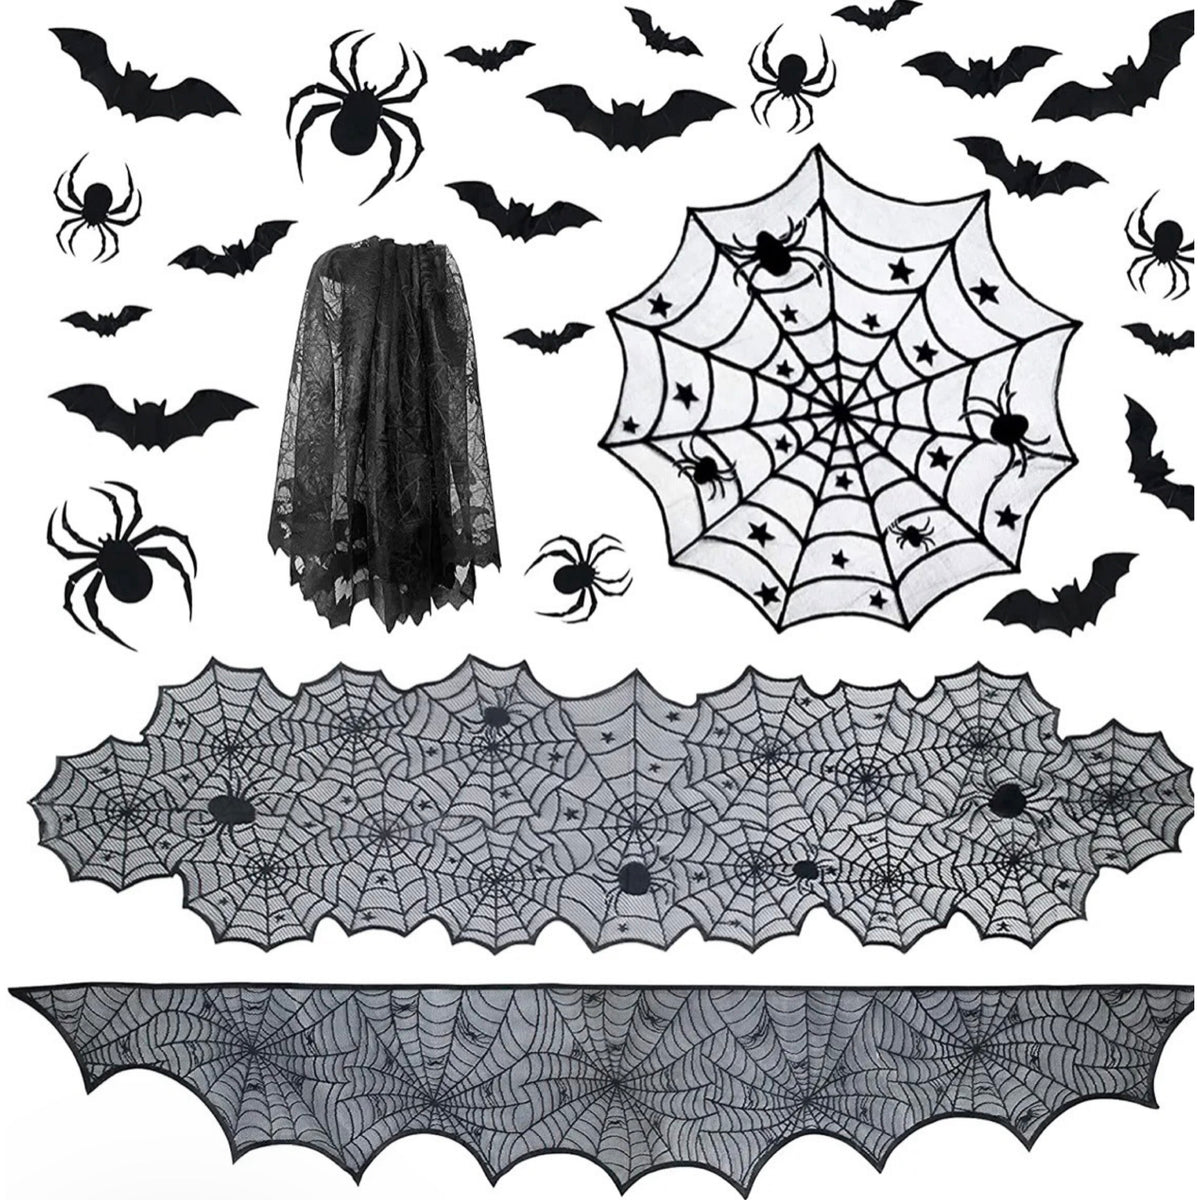 48pc Halloween Spider Web Tablecloth And Decor Set - Includes Runner & Mantle Scarf